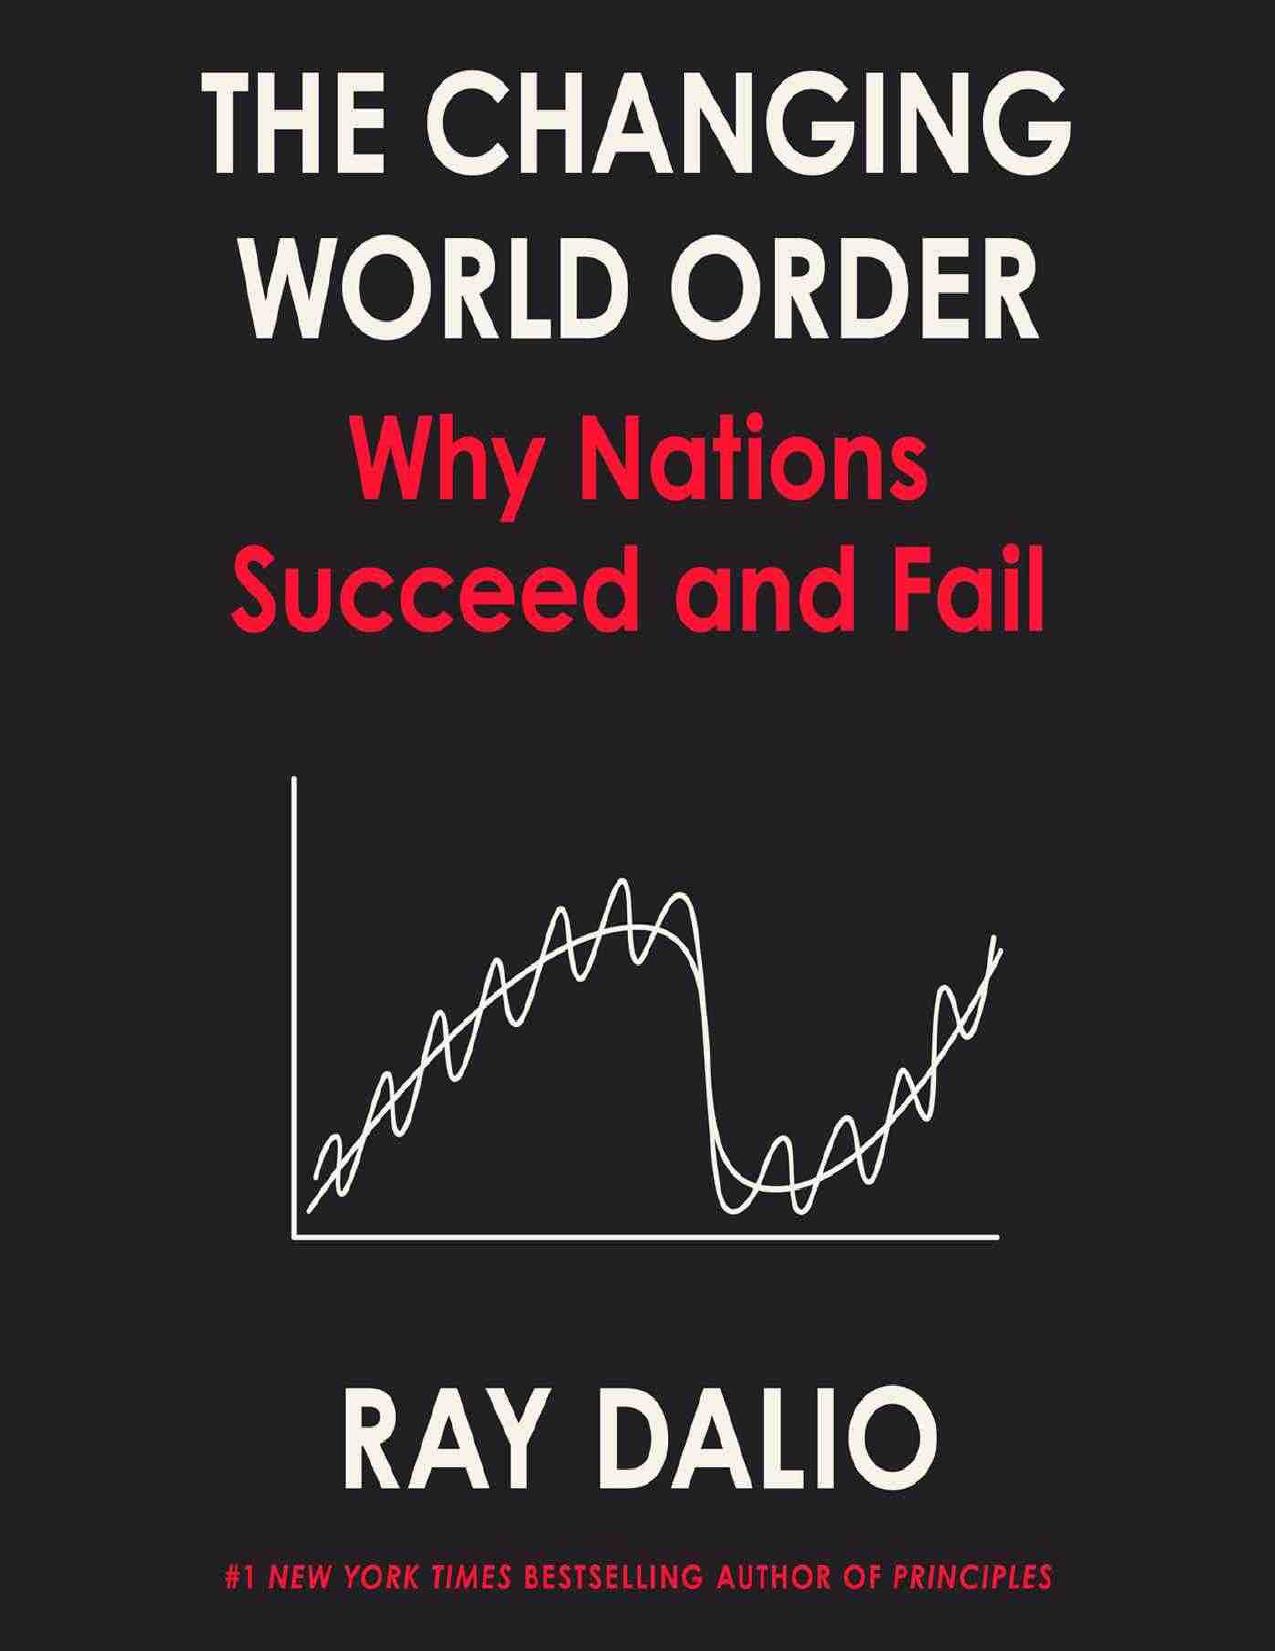 principle for dealing with the changing world order